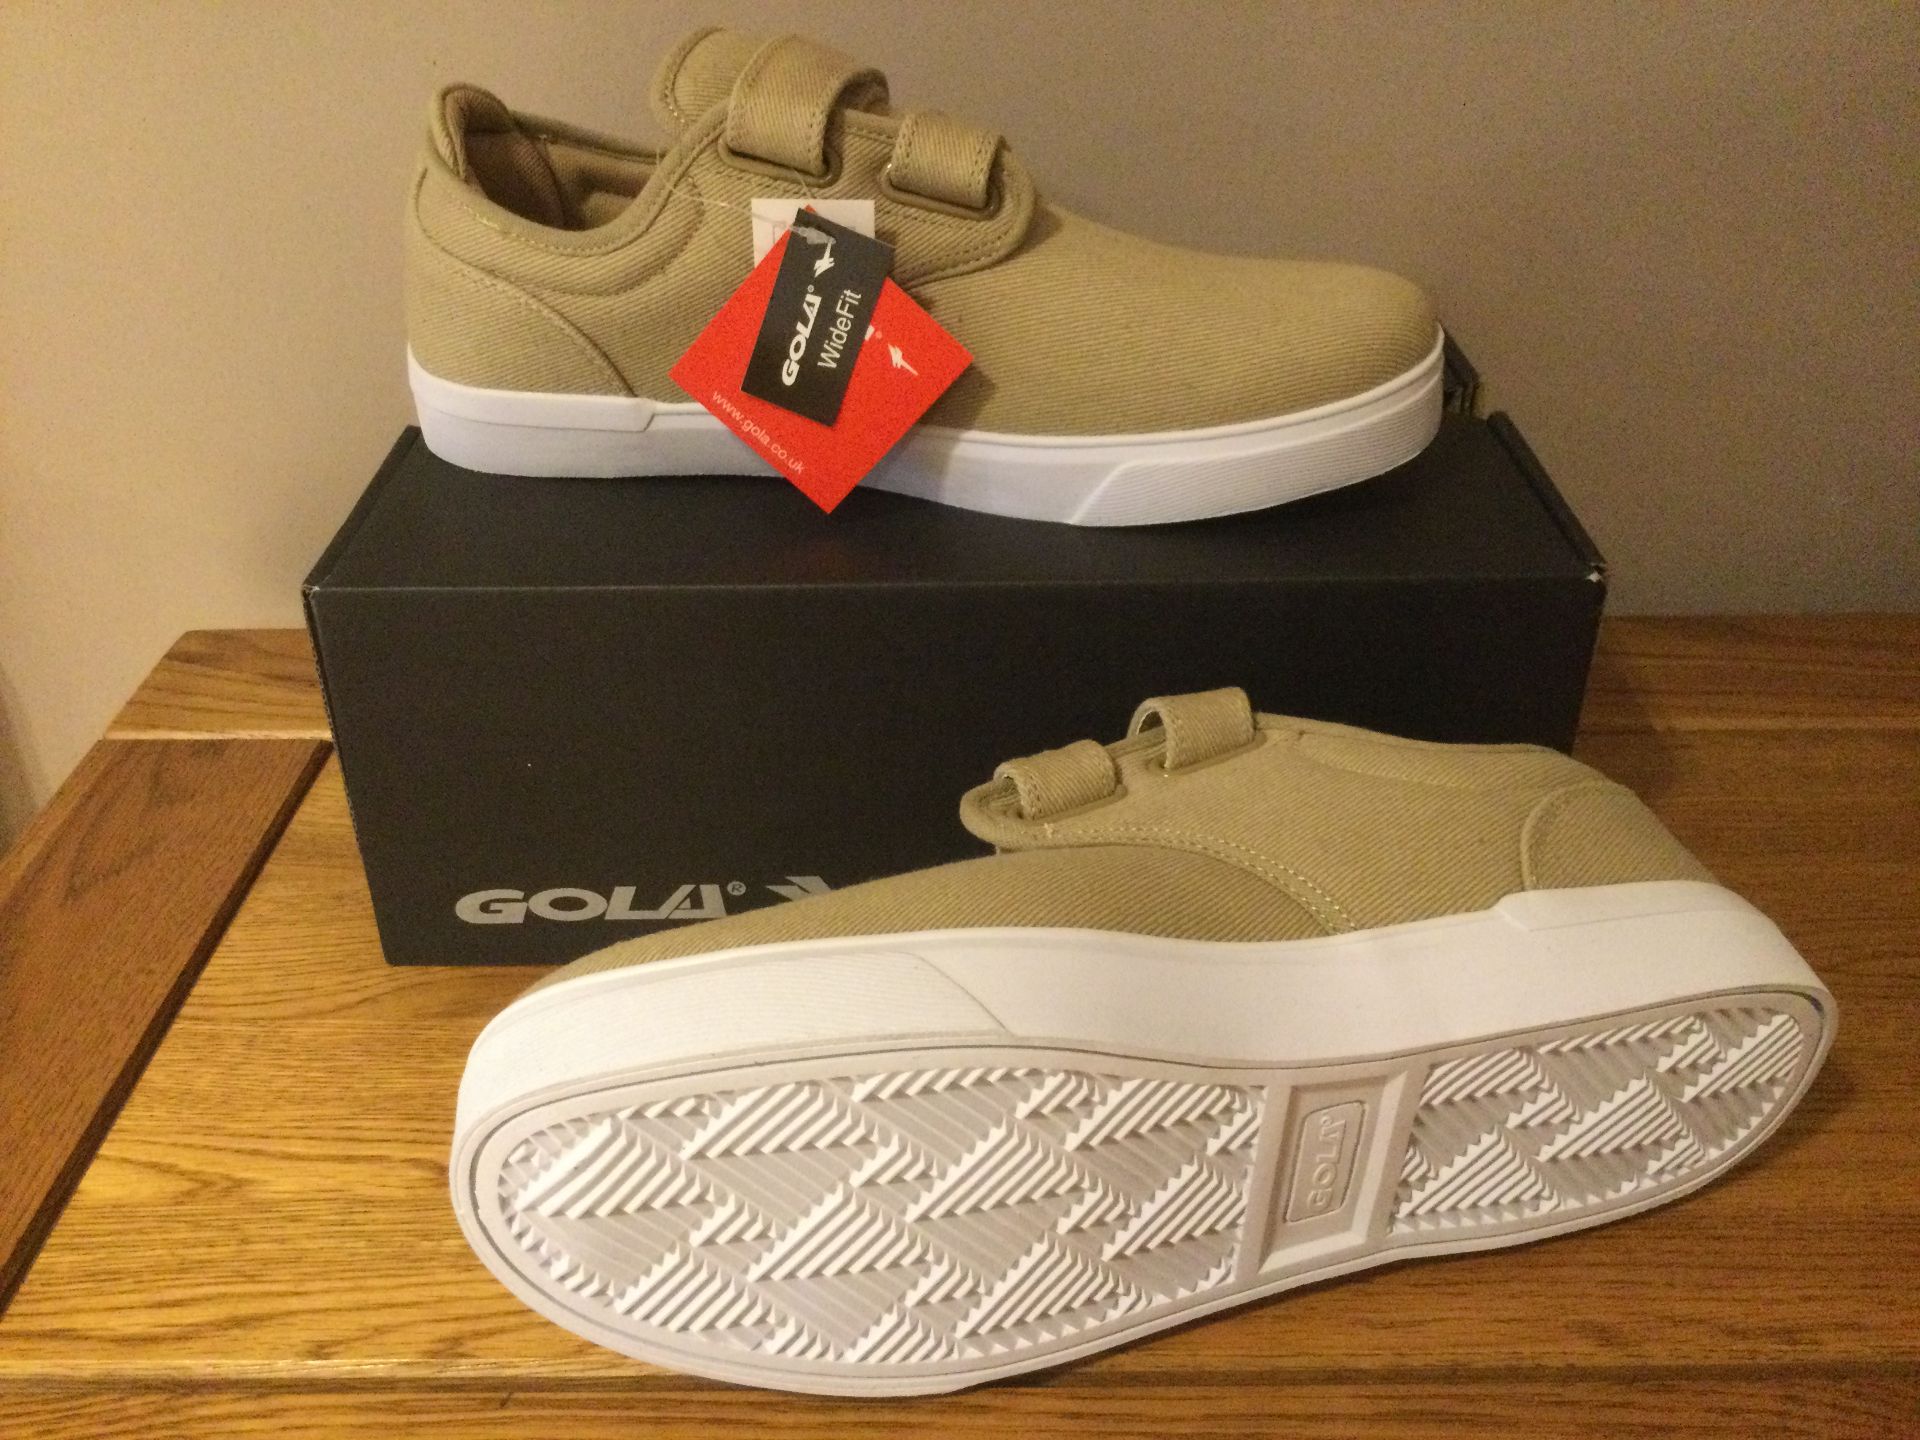 Gola “Panama” QF Men's Wide Fit Trainers, Size 10, Taupe/White - New RRP £36.00 - Image 4 of 5